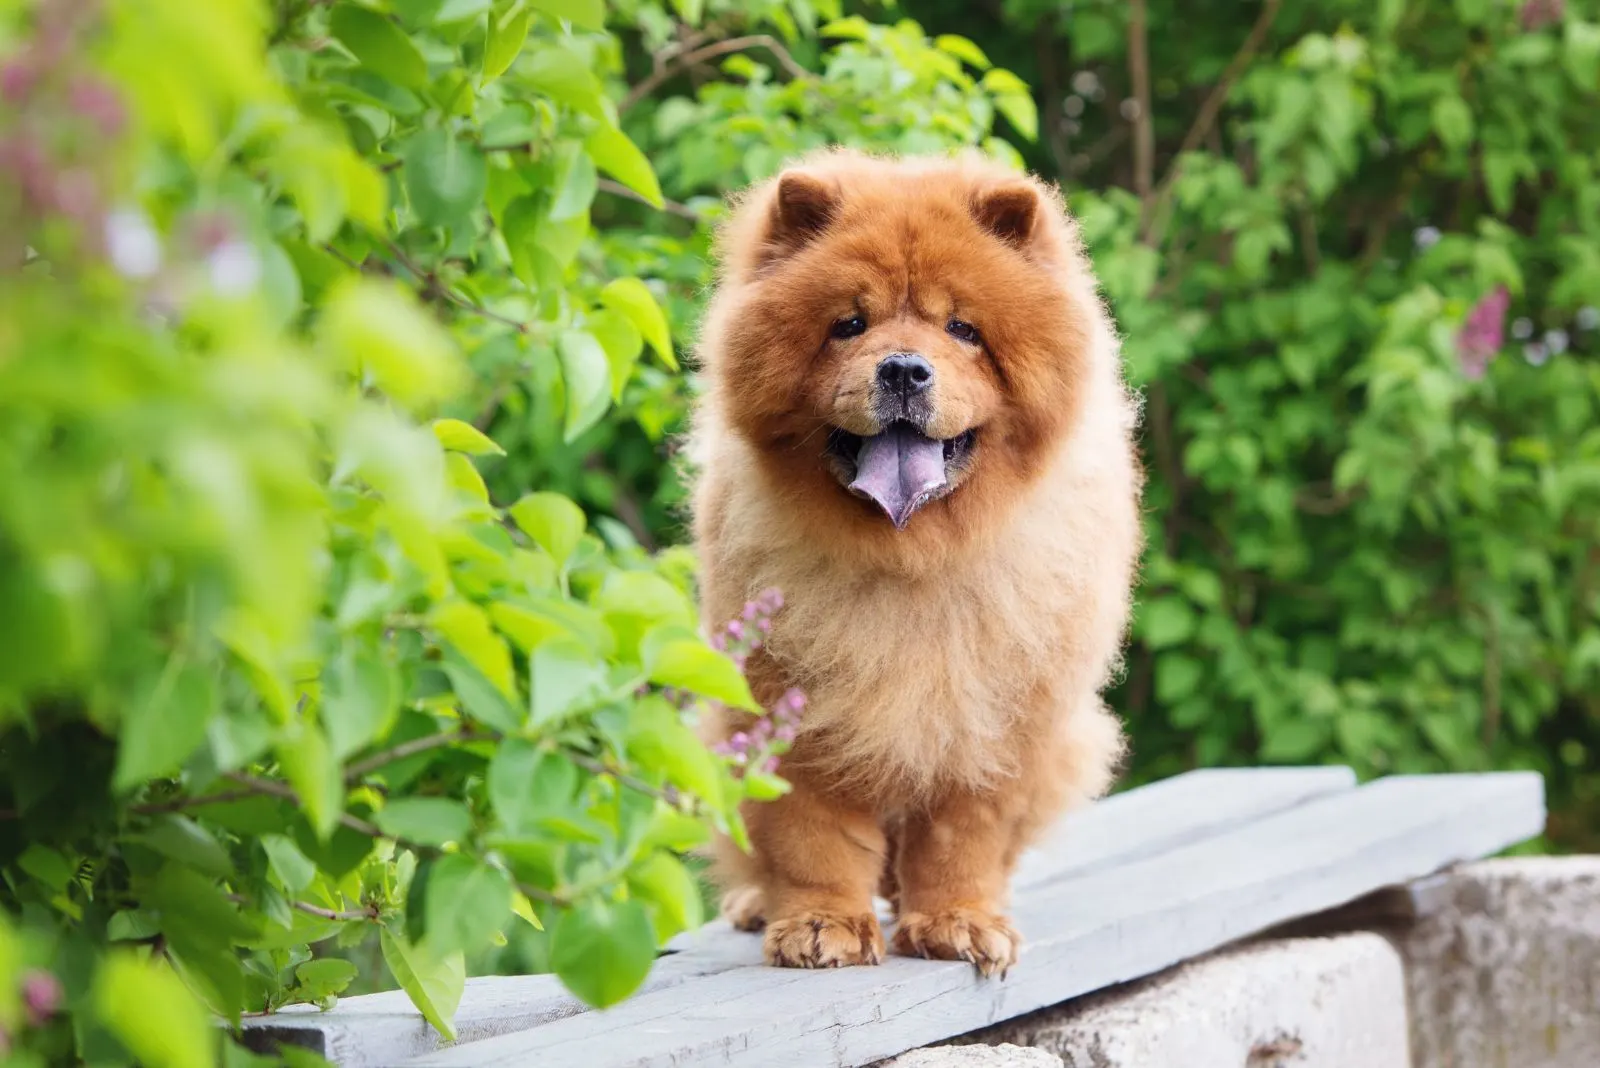 Chow Chow is standing on a wooden bench